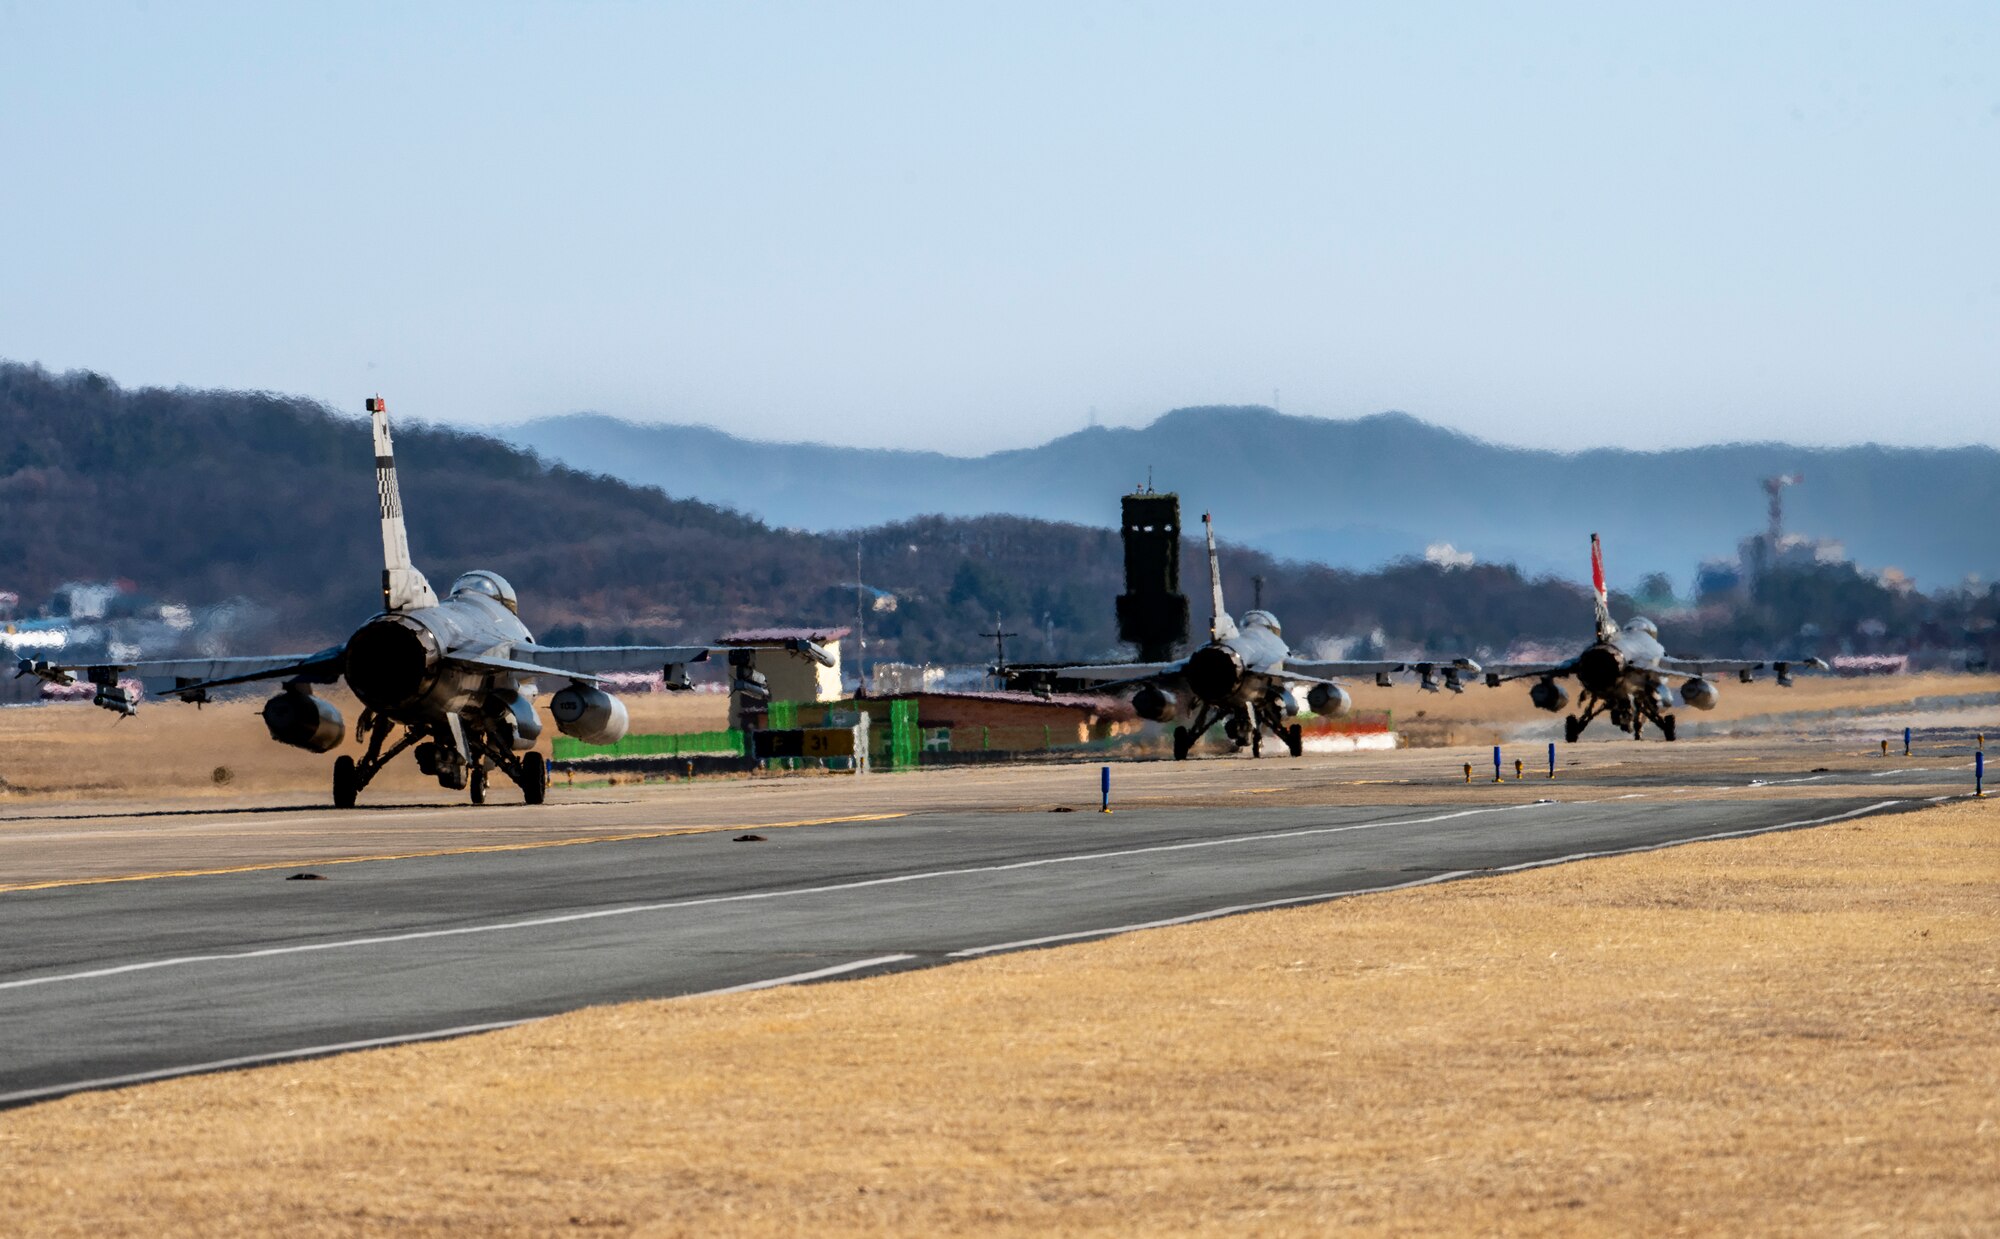 Three U.S. Air Force F-16 Fighting Falcons, 36th Fighter Squadron, taxi on the runway after landing during a training event at Daegu Air Base, Republic of Korea, Jan. 30, 2023.